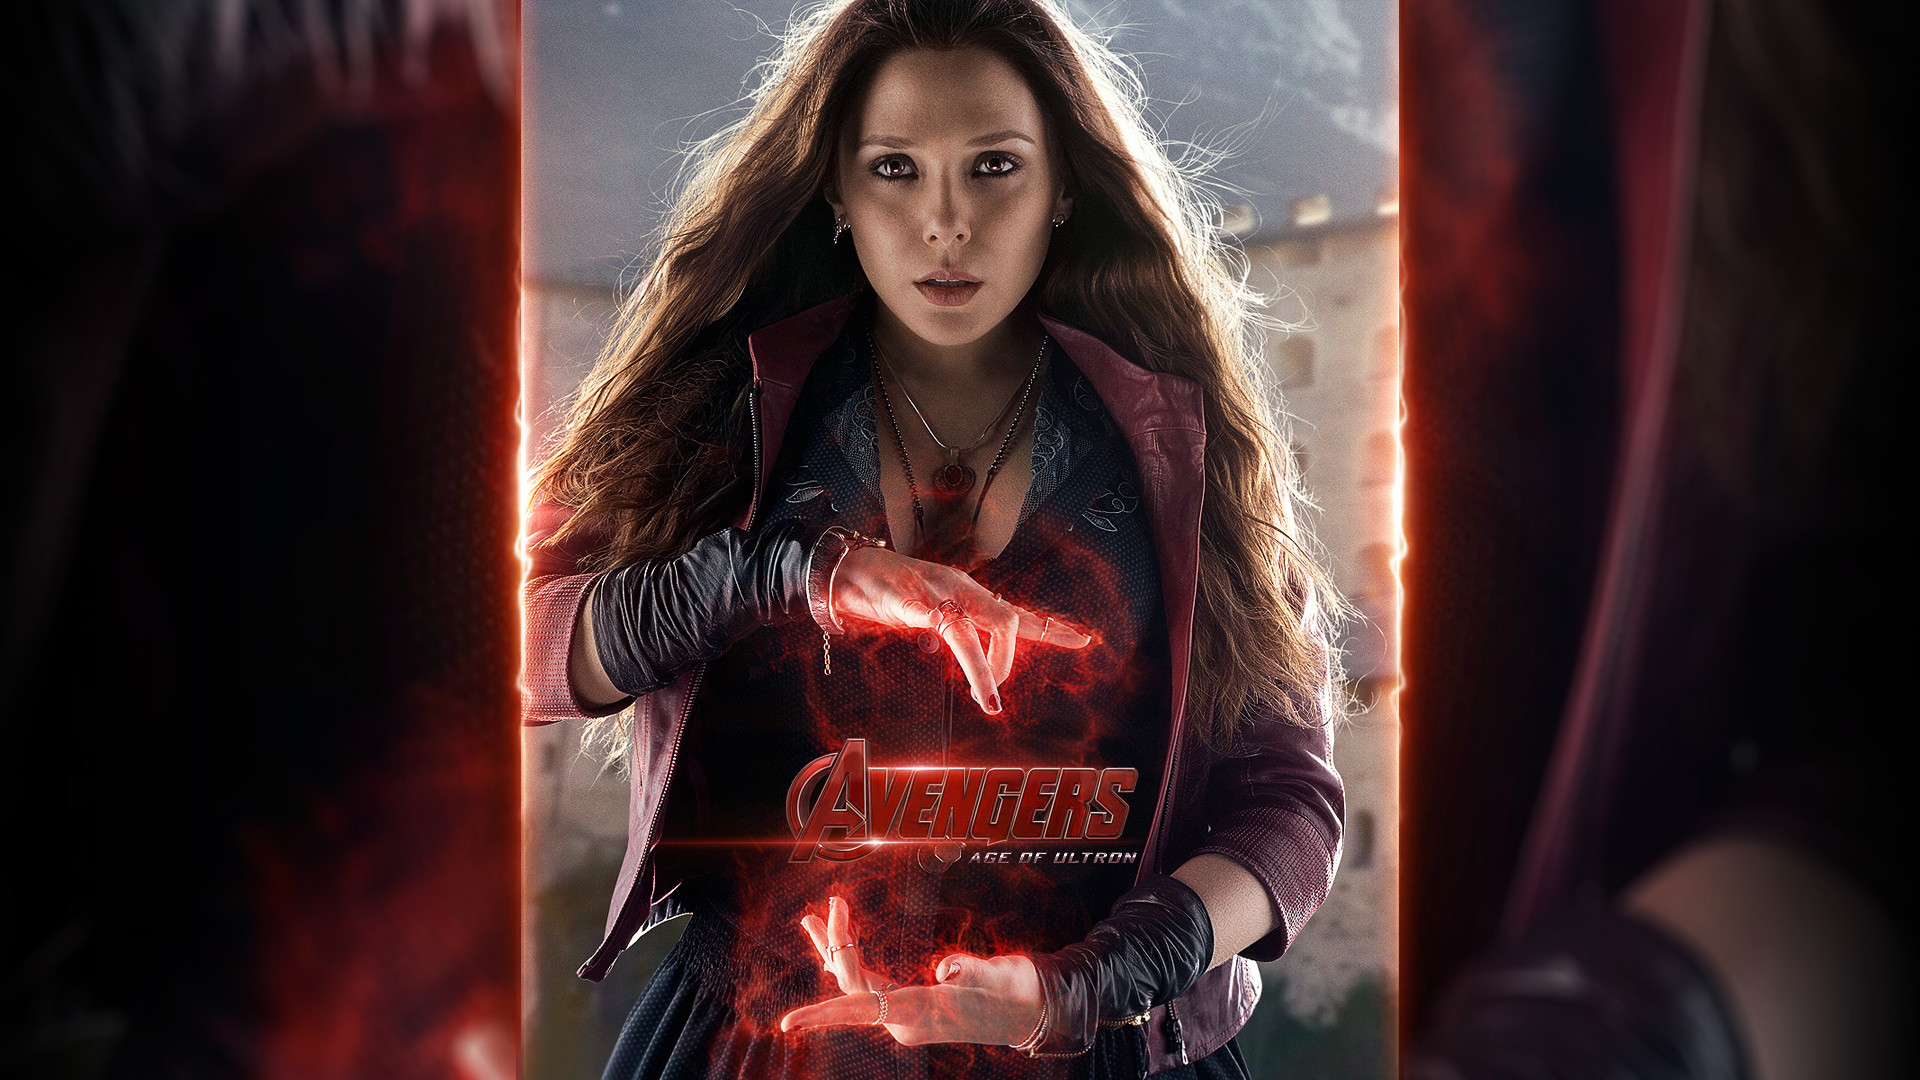 1920x1080 Avengers - Age Of Ultron: Scarlet Witch. Scarlet Witch Wallpaper 